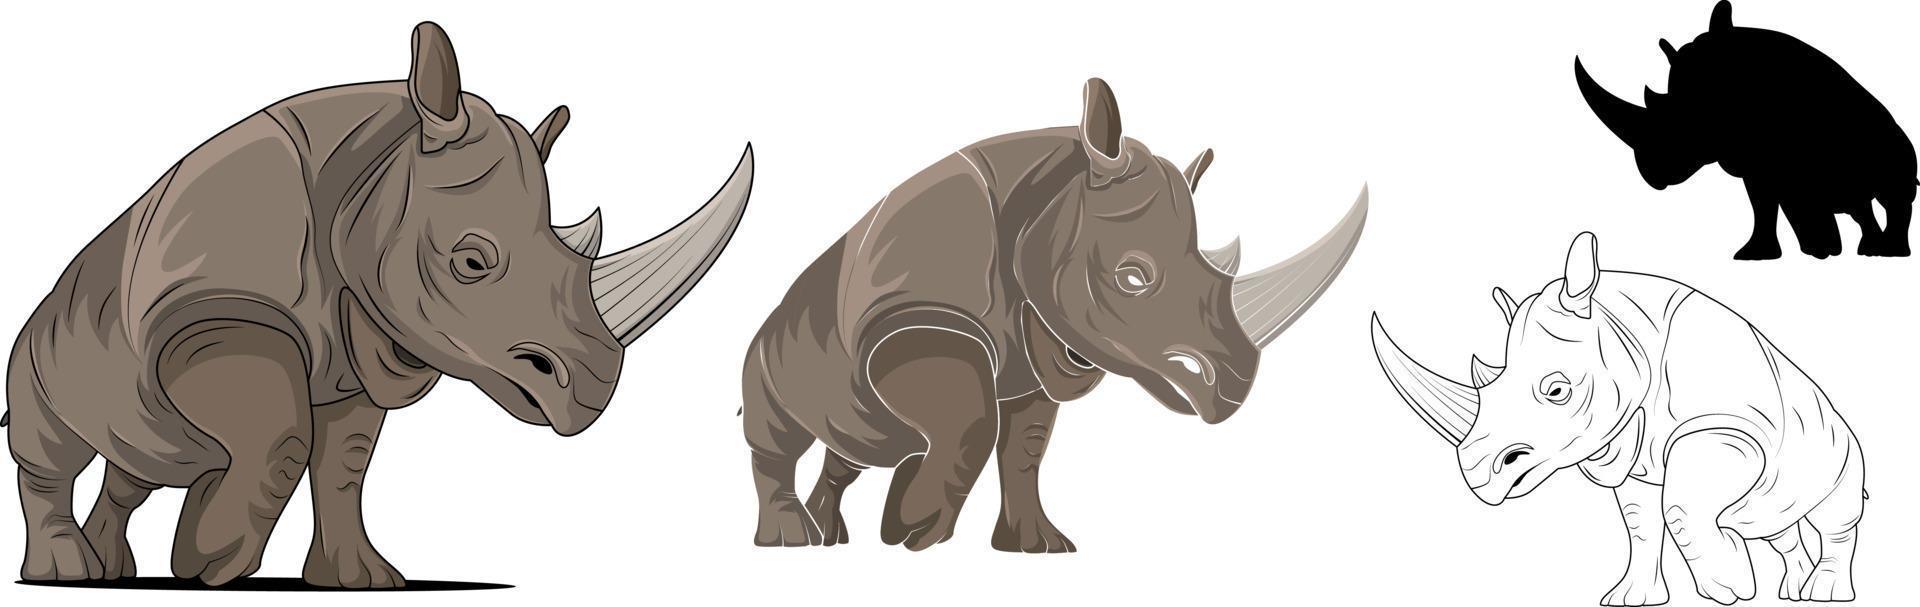 vector illustration of rhino with various concepts. isolated white background.